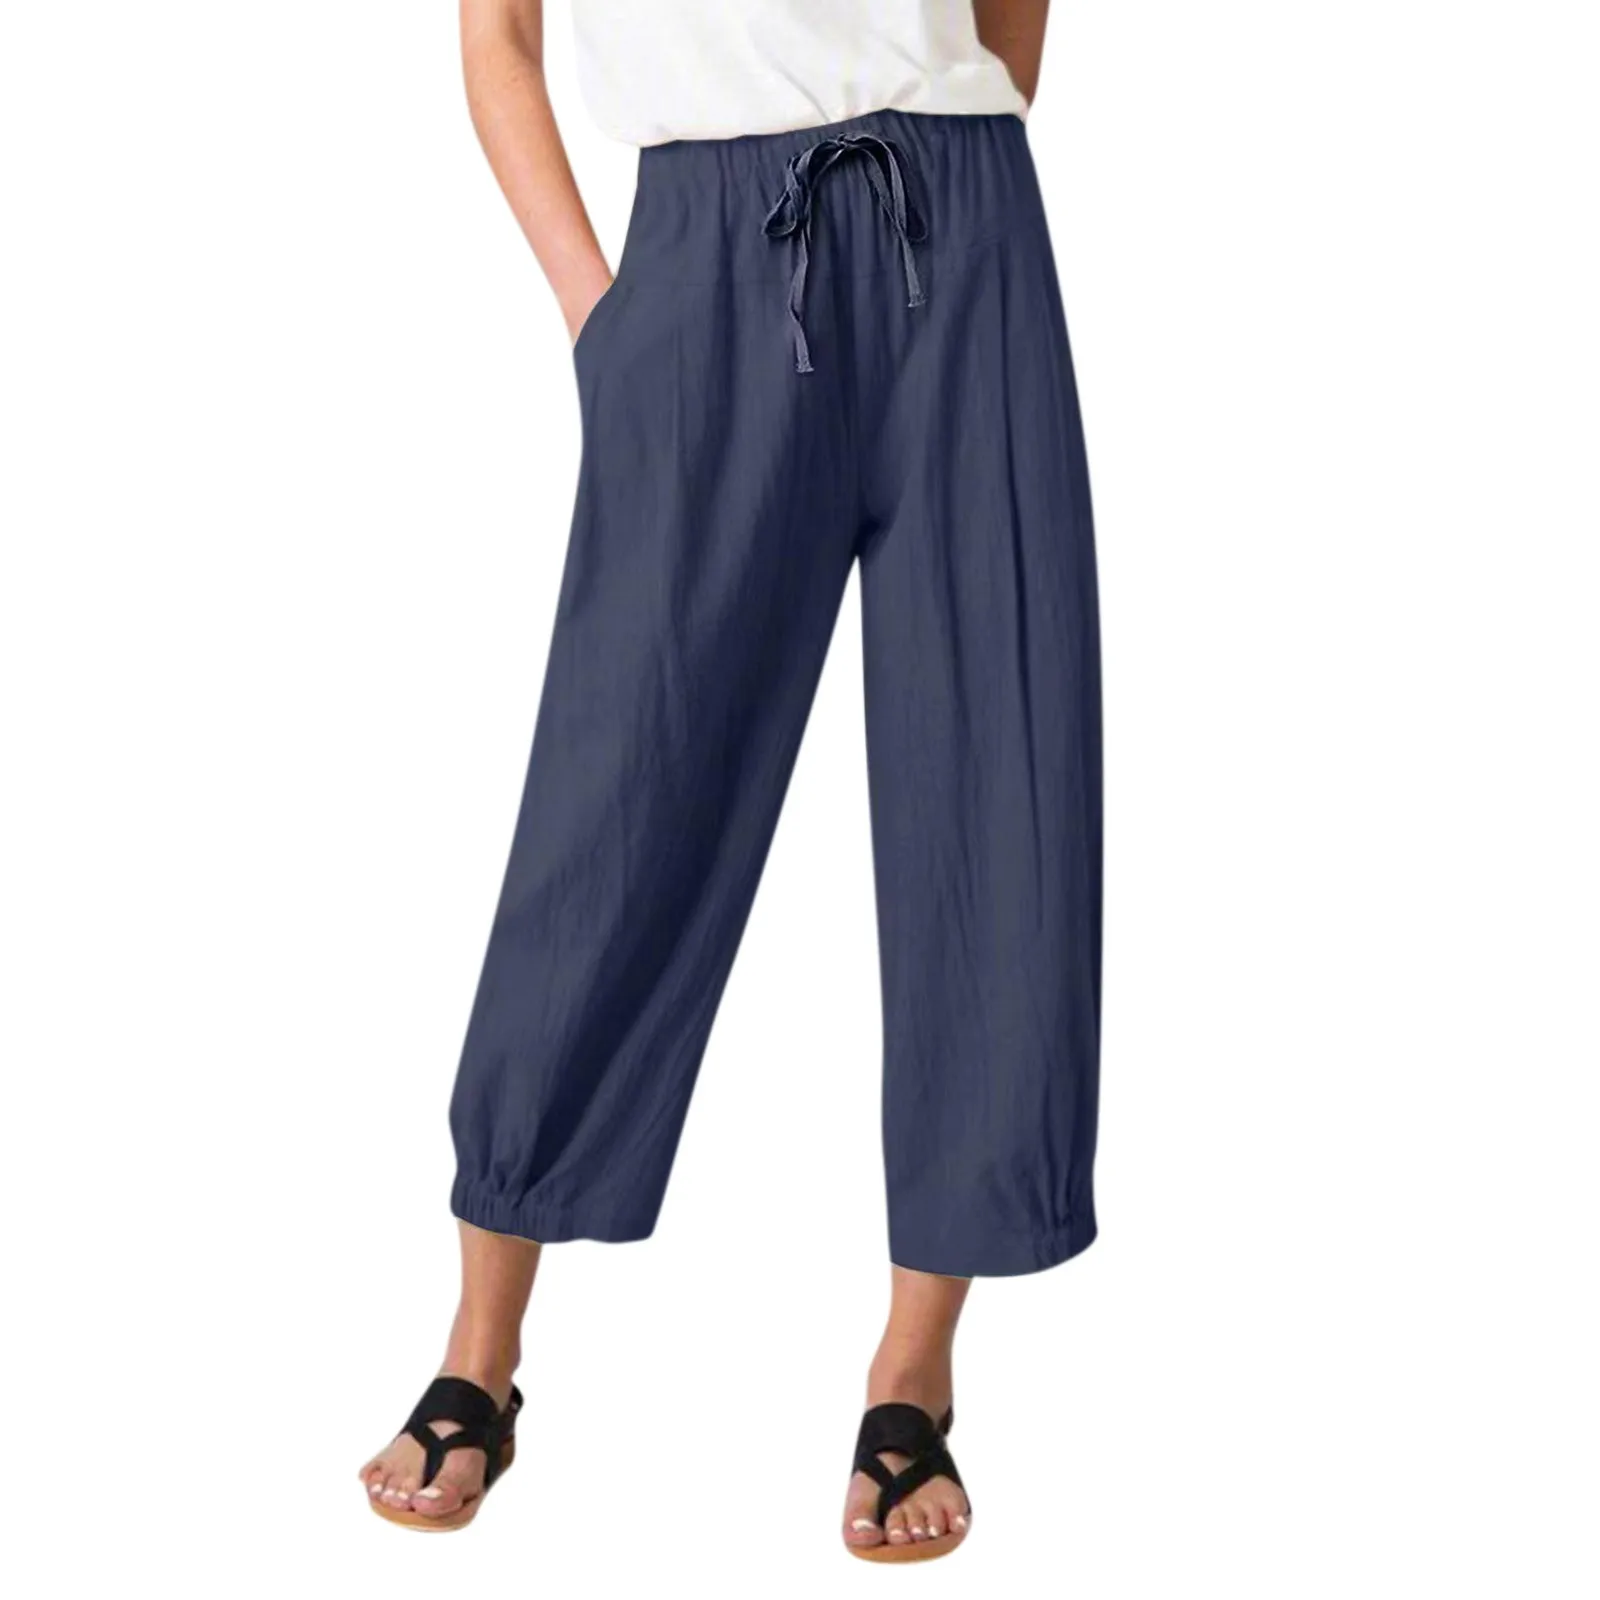 

Women's Casual And Fashionable Cotton And Linen Drawstring Cropped Pants With Pockets And Wide Leg Pants pantalon femme